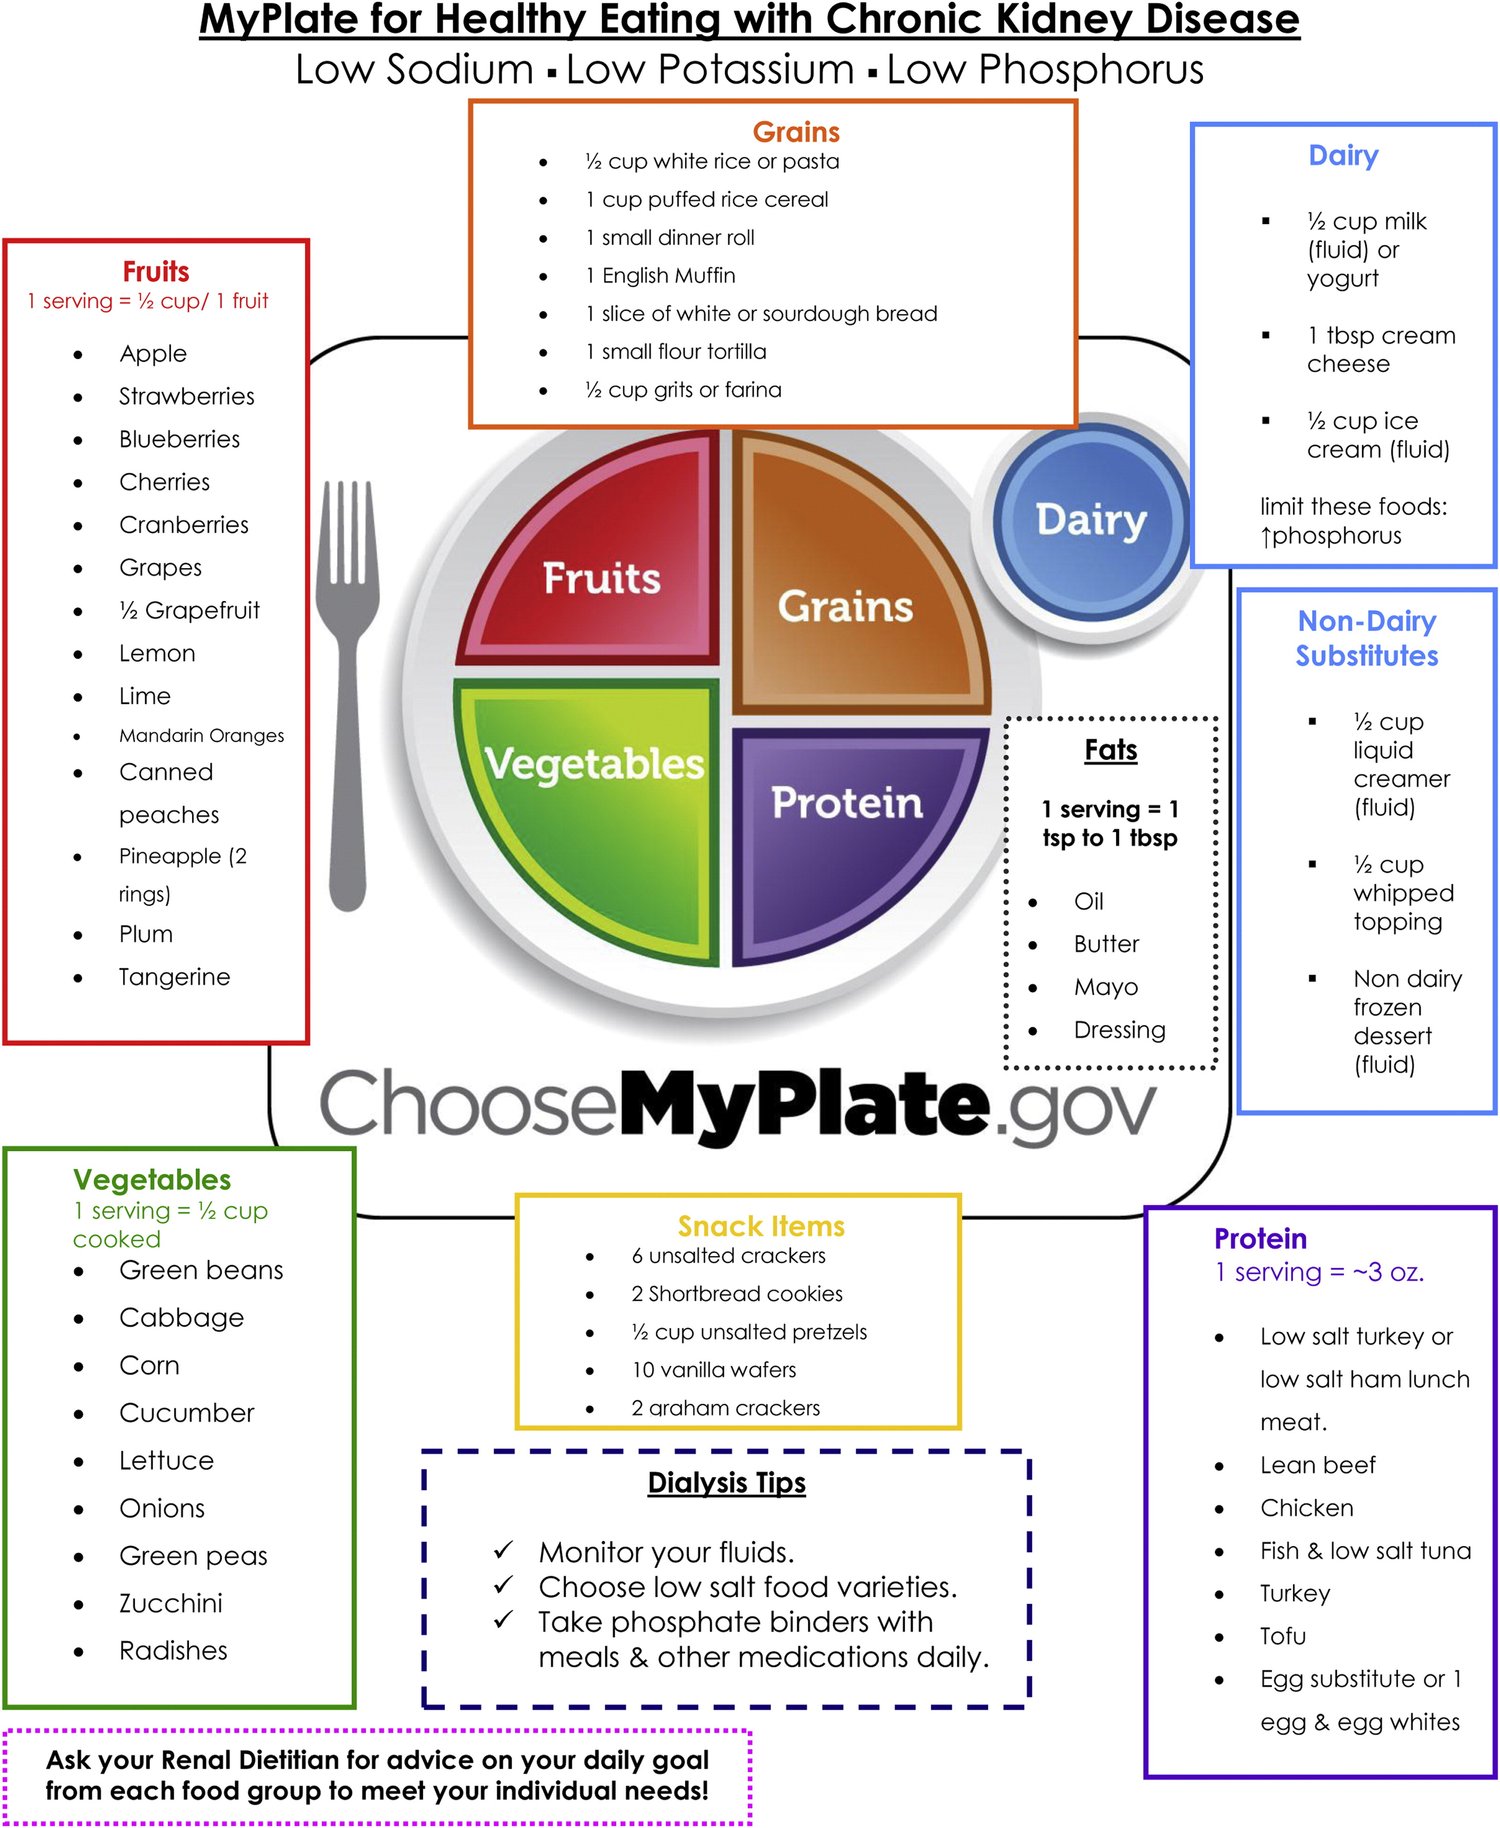 Food Group Chart for Healthy Eating with CKD